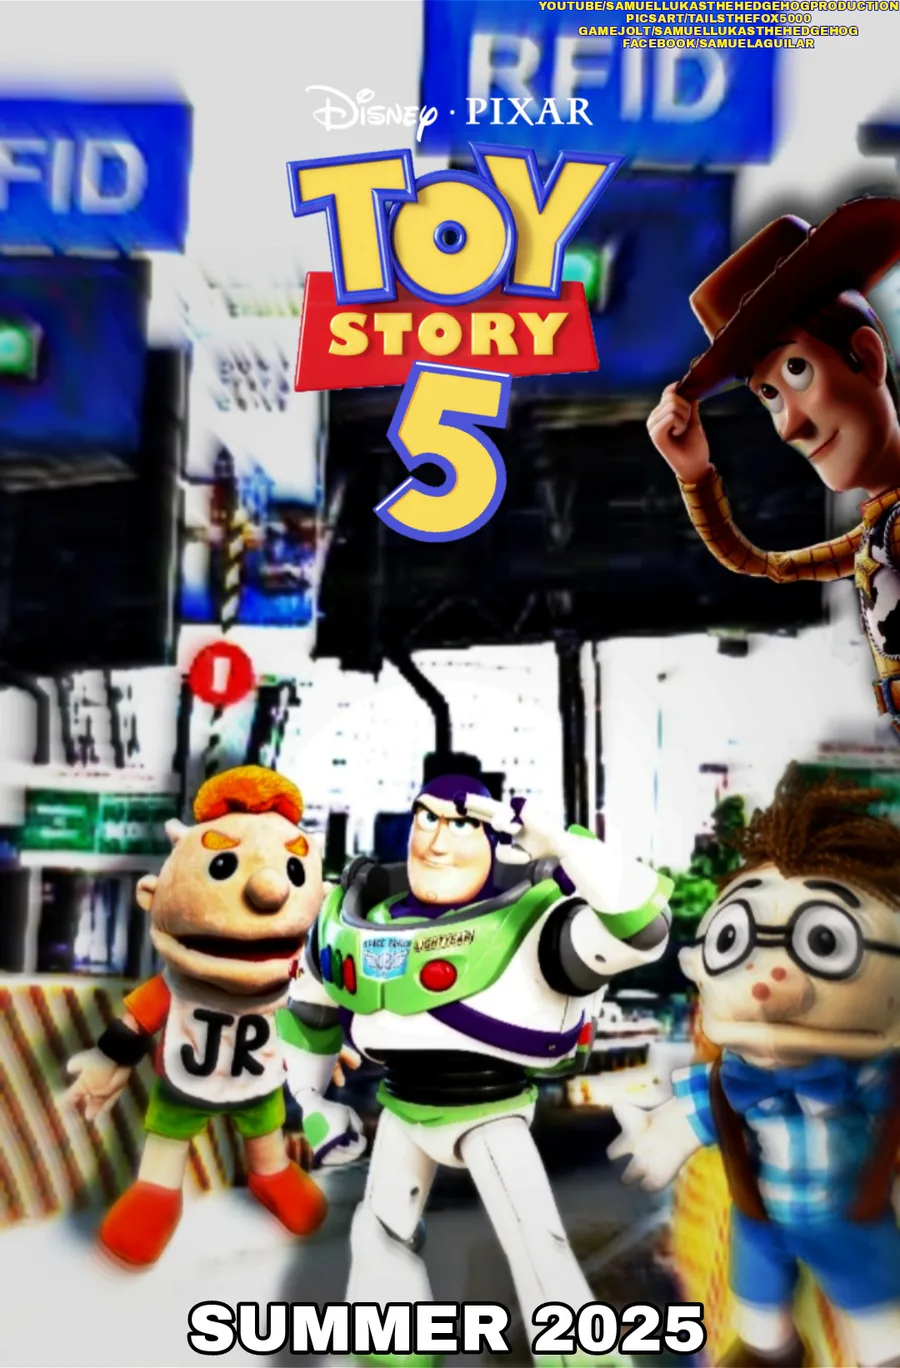 toy story 5 trailer movie teaser 2025 épta trailers - video